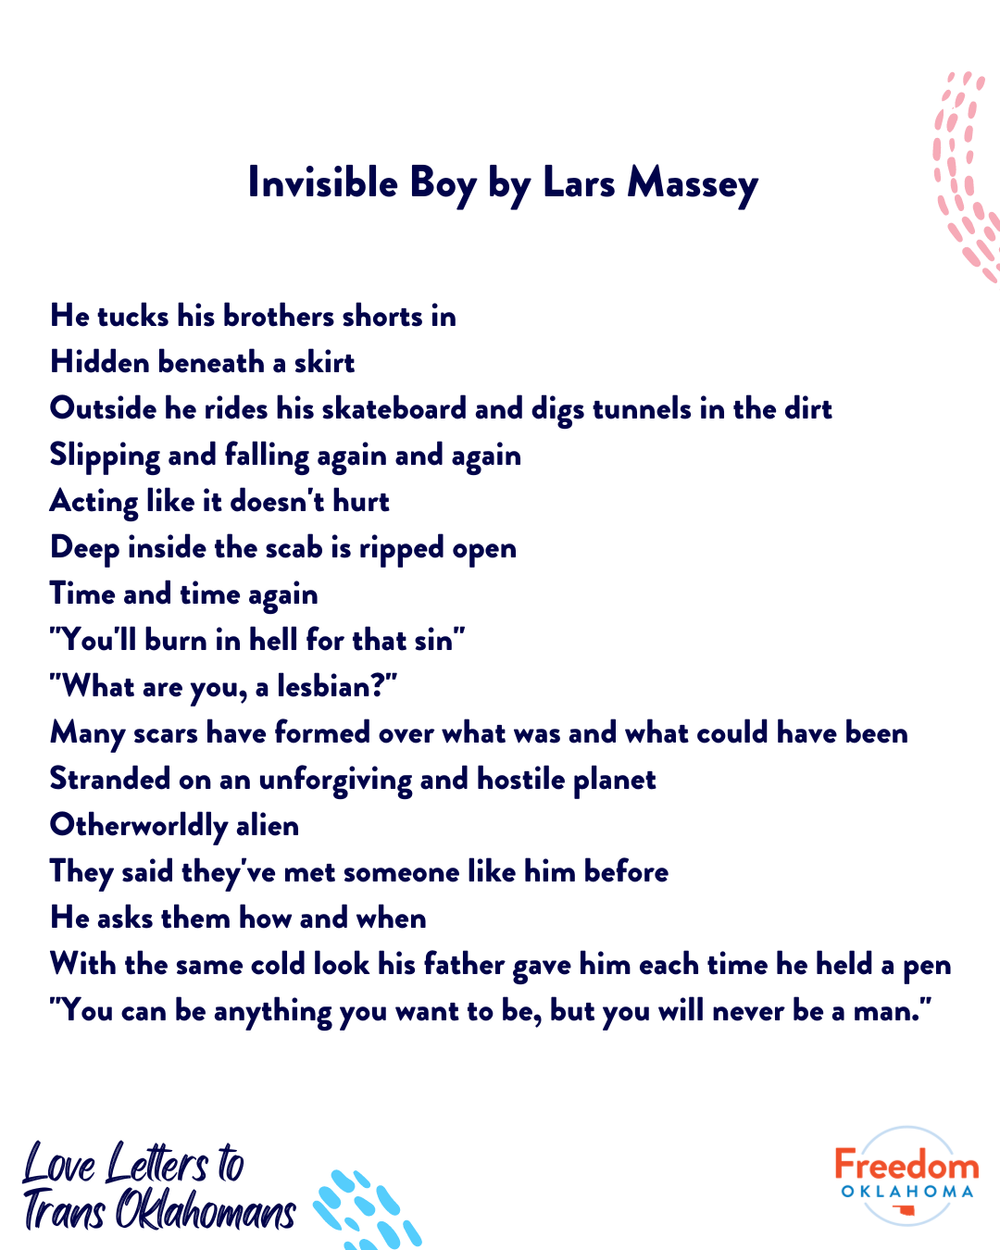  The poem Invisible Boy by Lars Massey: He tucks his brothers shorts in Hidden beneath a skirt Outside he rides his skateboard and digs tunnels in the dirt Slipping and falling again and again Acting like it doesn't hurt Deep inside the scab is rippe